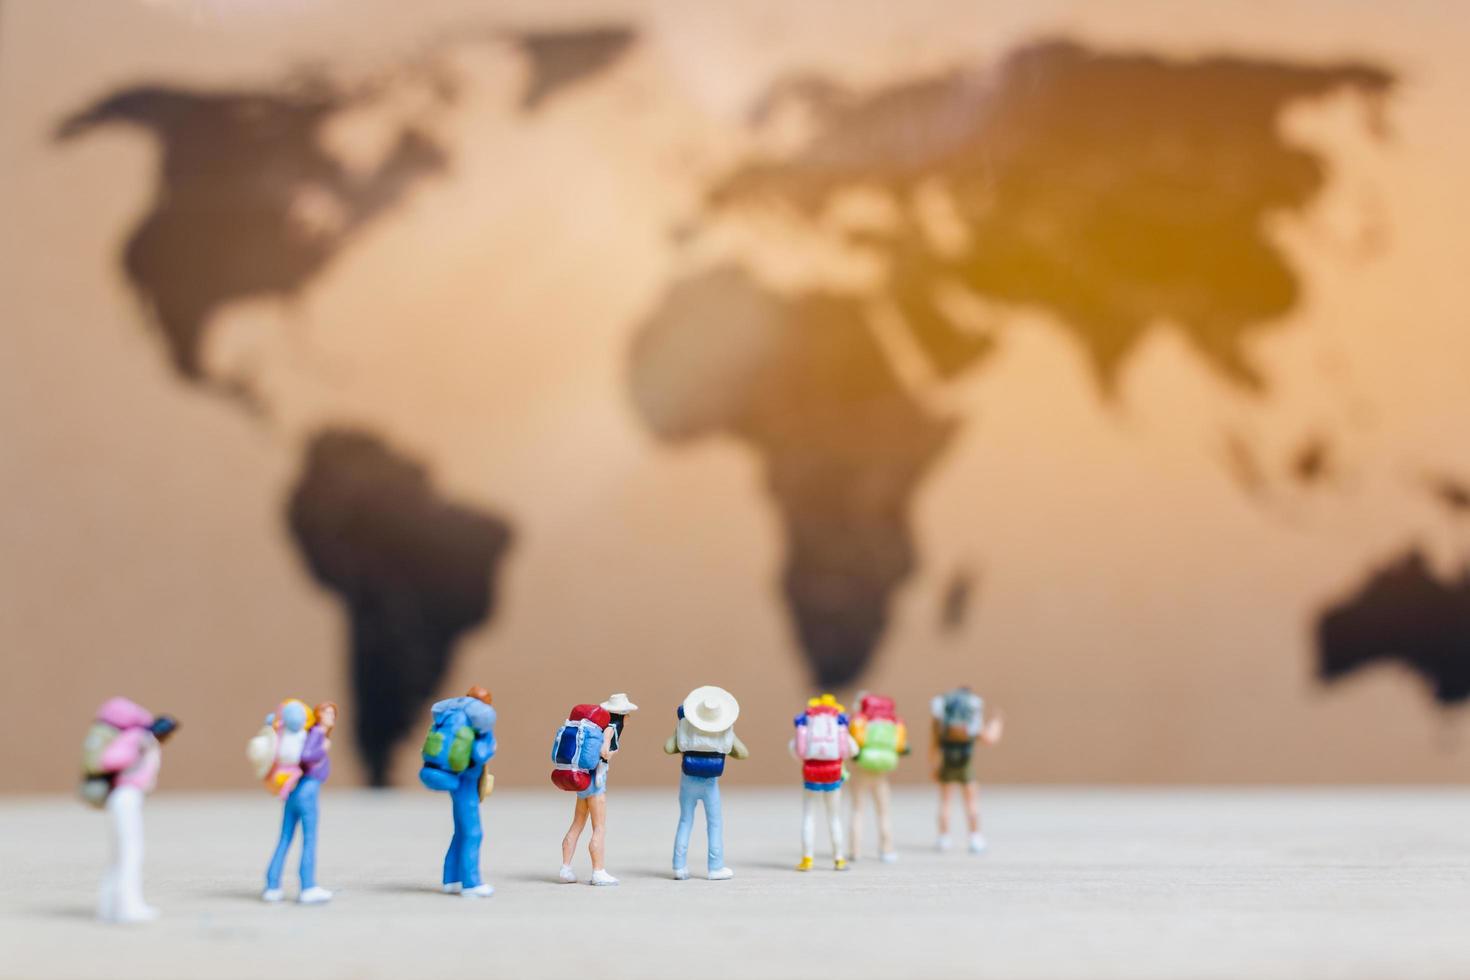 Miniature travelers walking on a world map, traveling and exploring the world concept photo